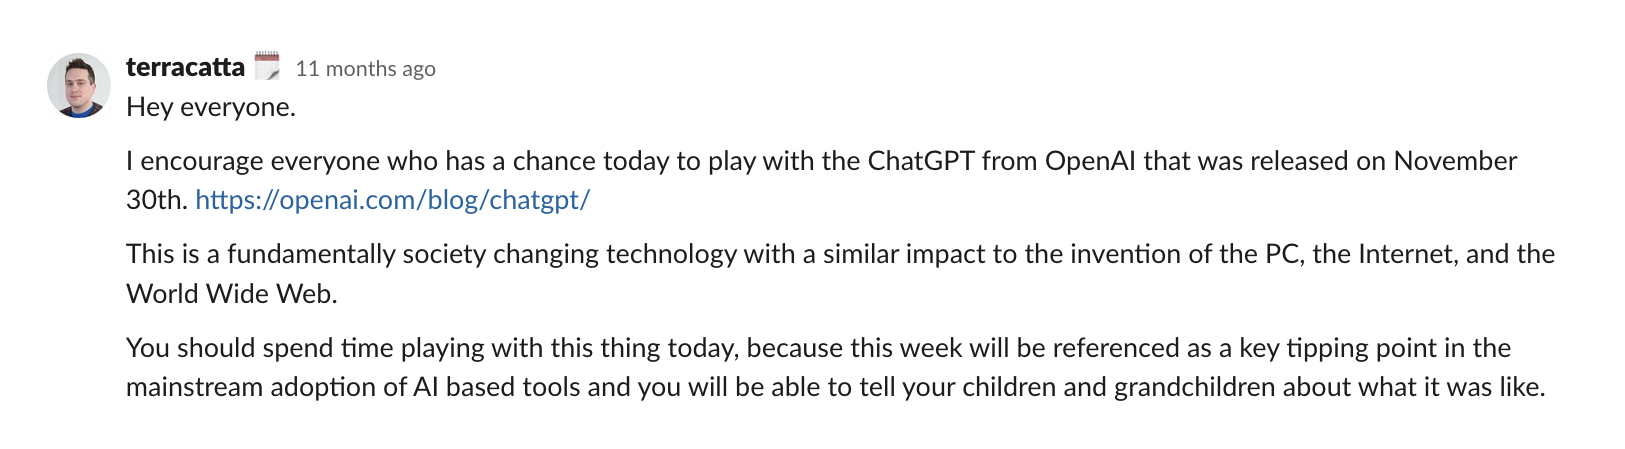 A screenshot of Kolide CEO Jason Meller's Slack message to the company advocating to use AI products like ChatGPT when they were launched to better understand the changing technology landscape.